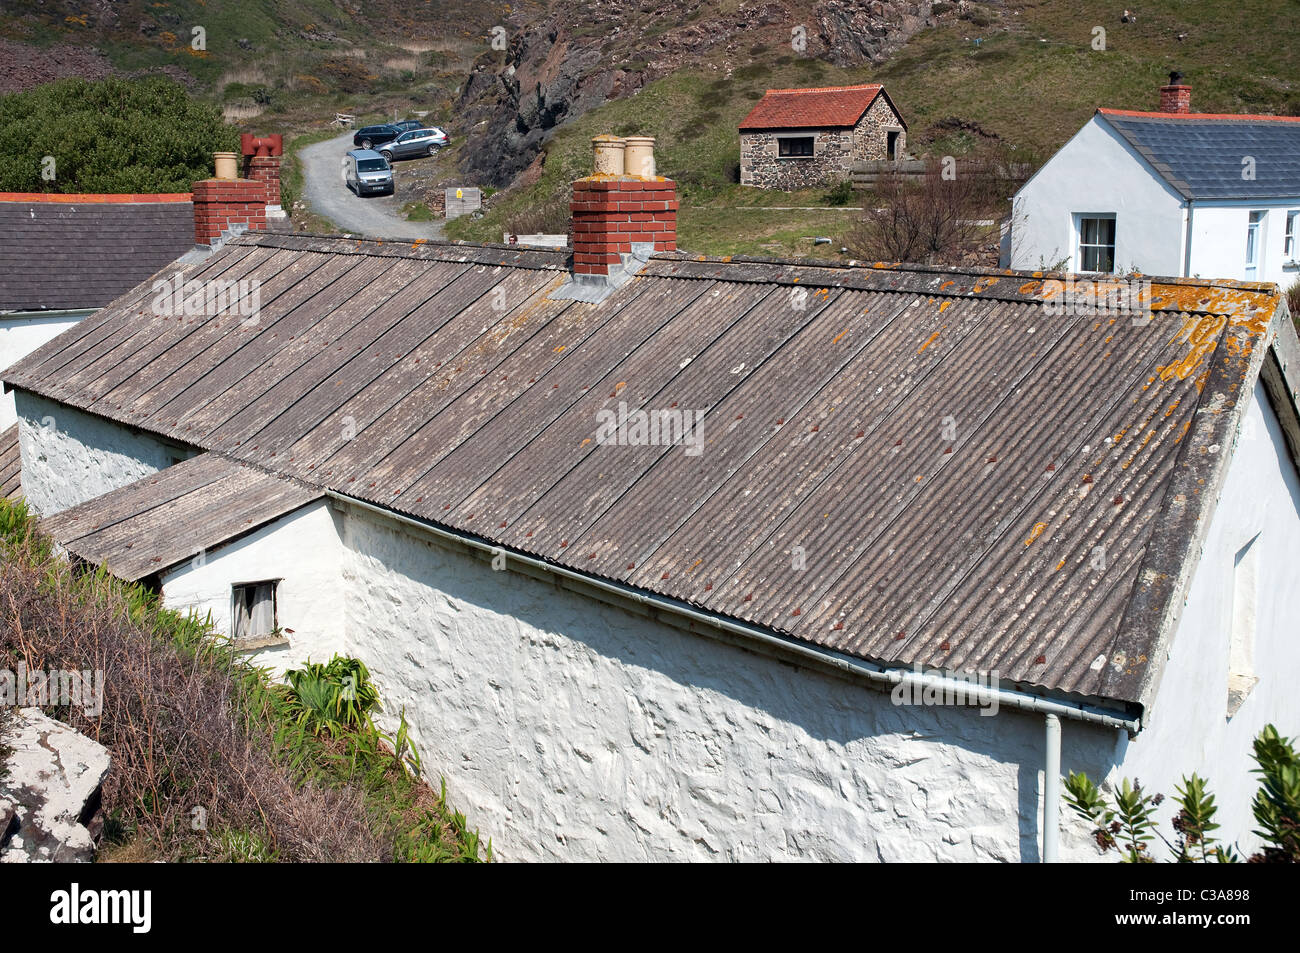 An Asbestos roof on an old cottage in cornwall, uk Stock Photo